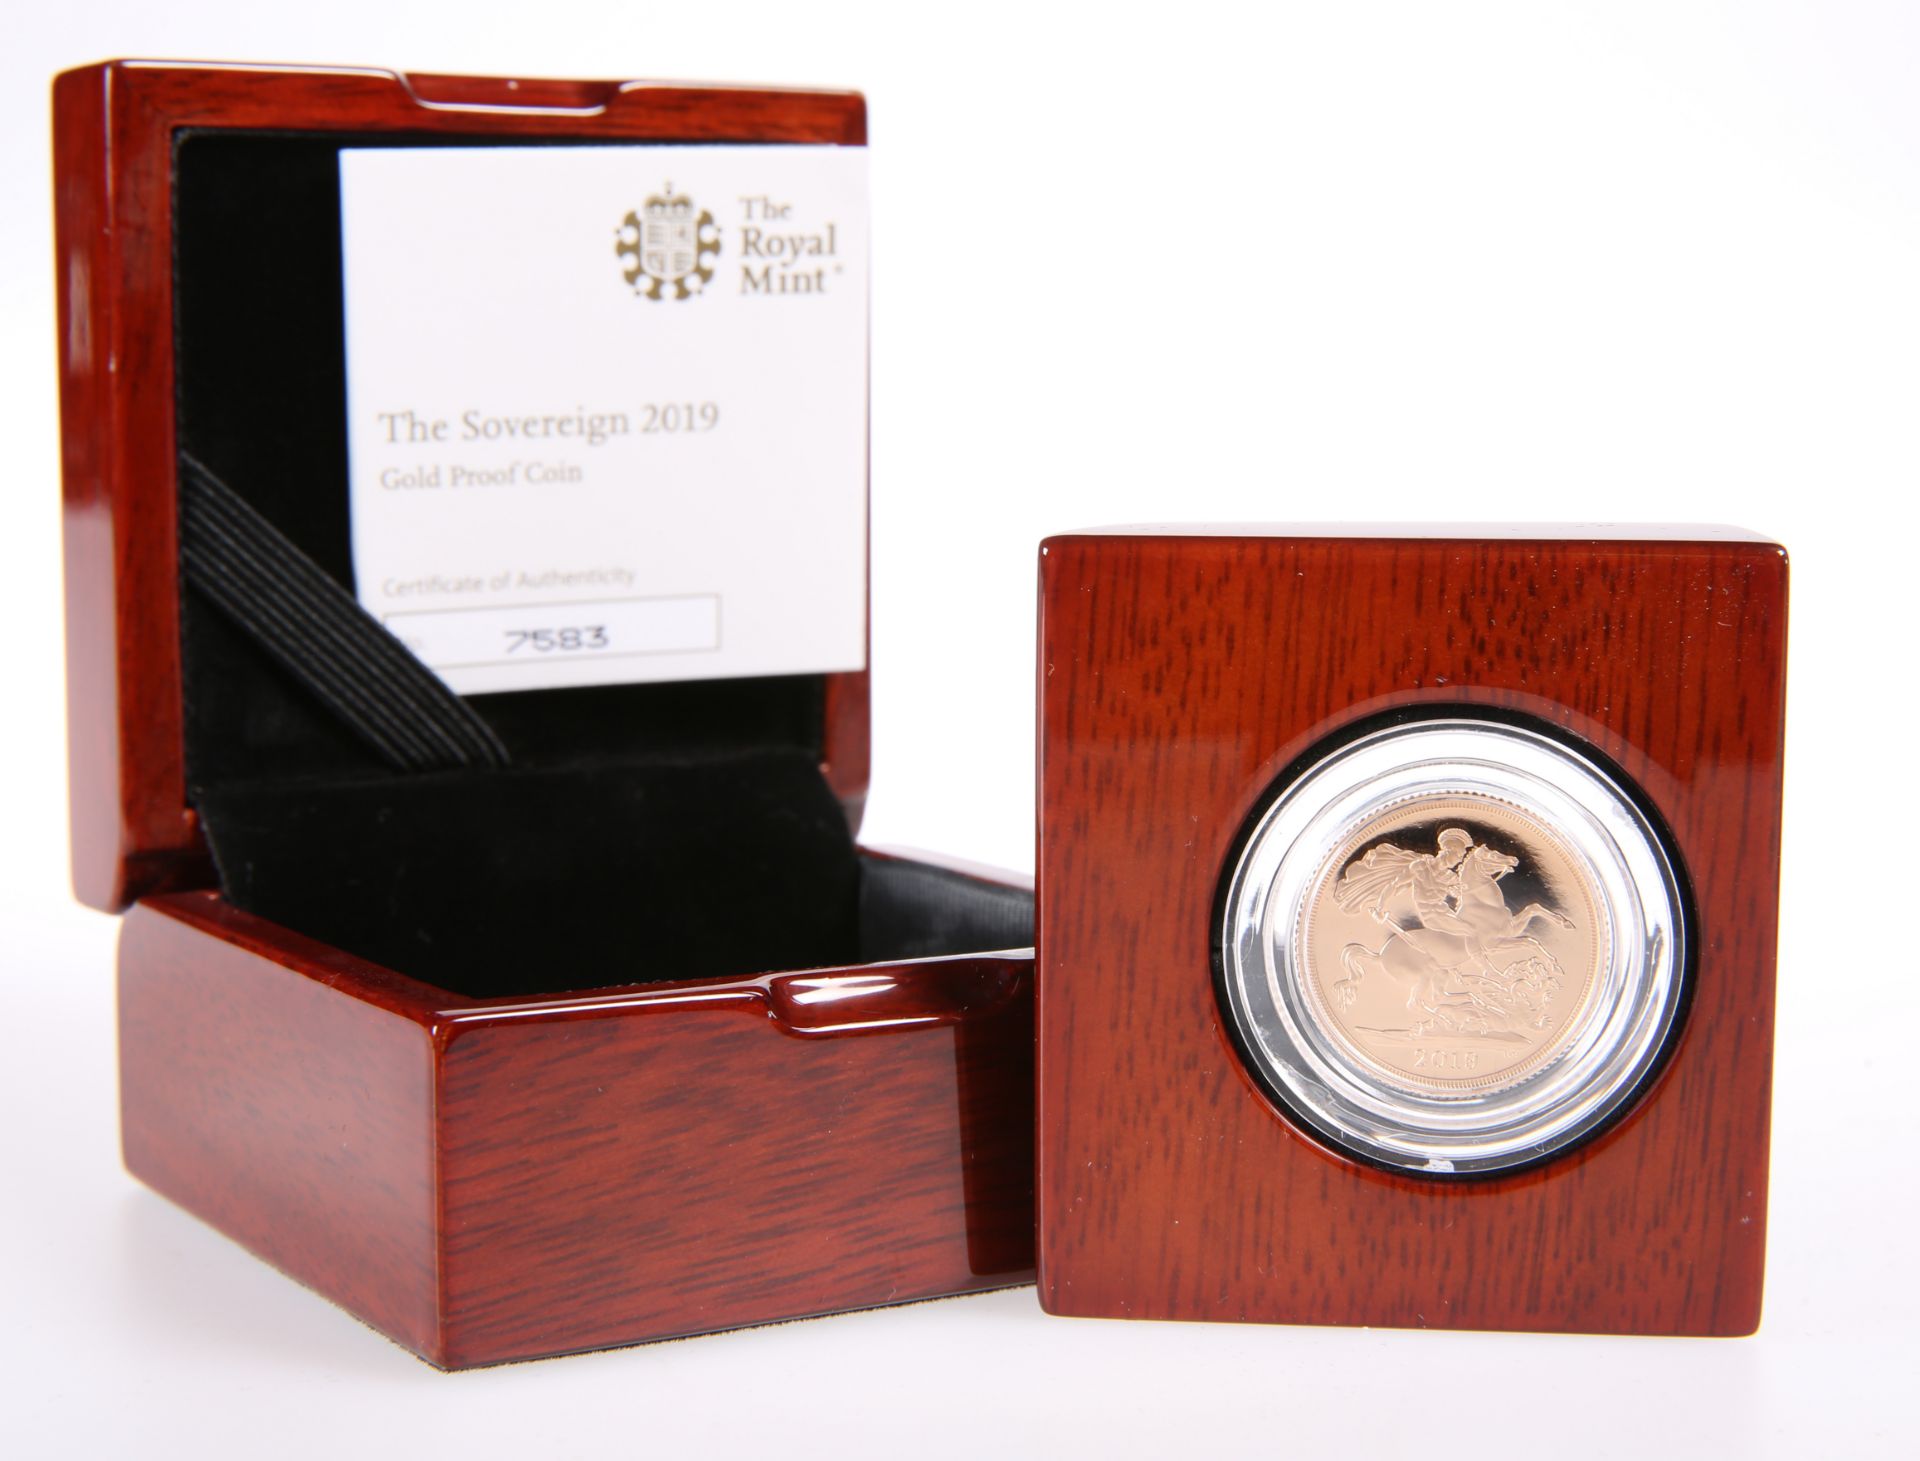 A GOLD PROOF FULL SOVEREIGN, 2019, in Royal Mint box with COA no. 7583